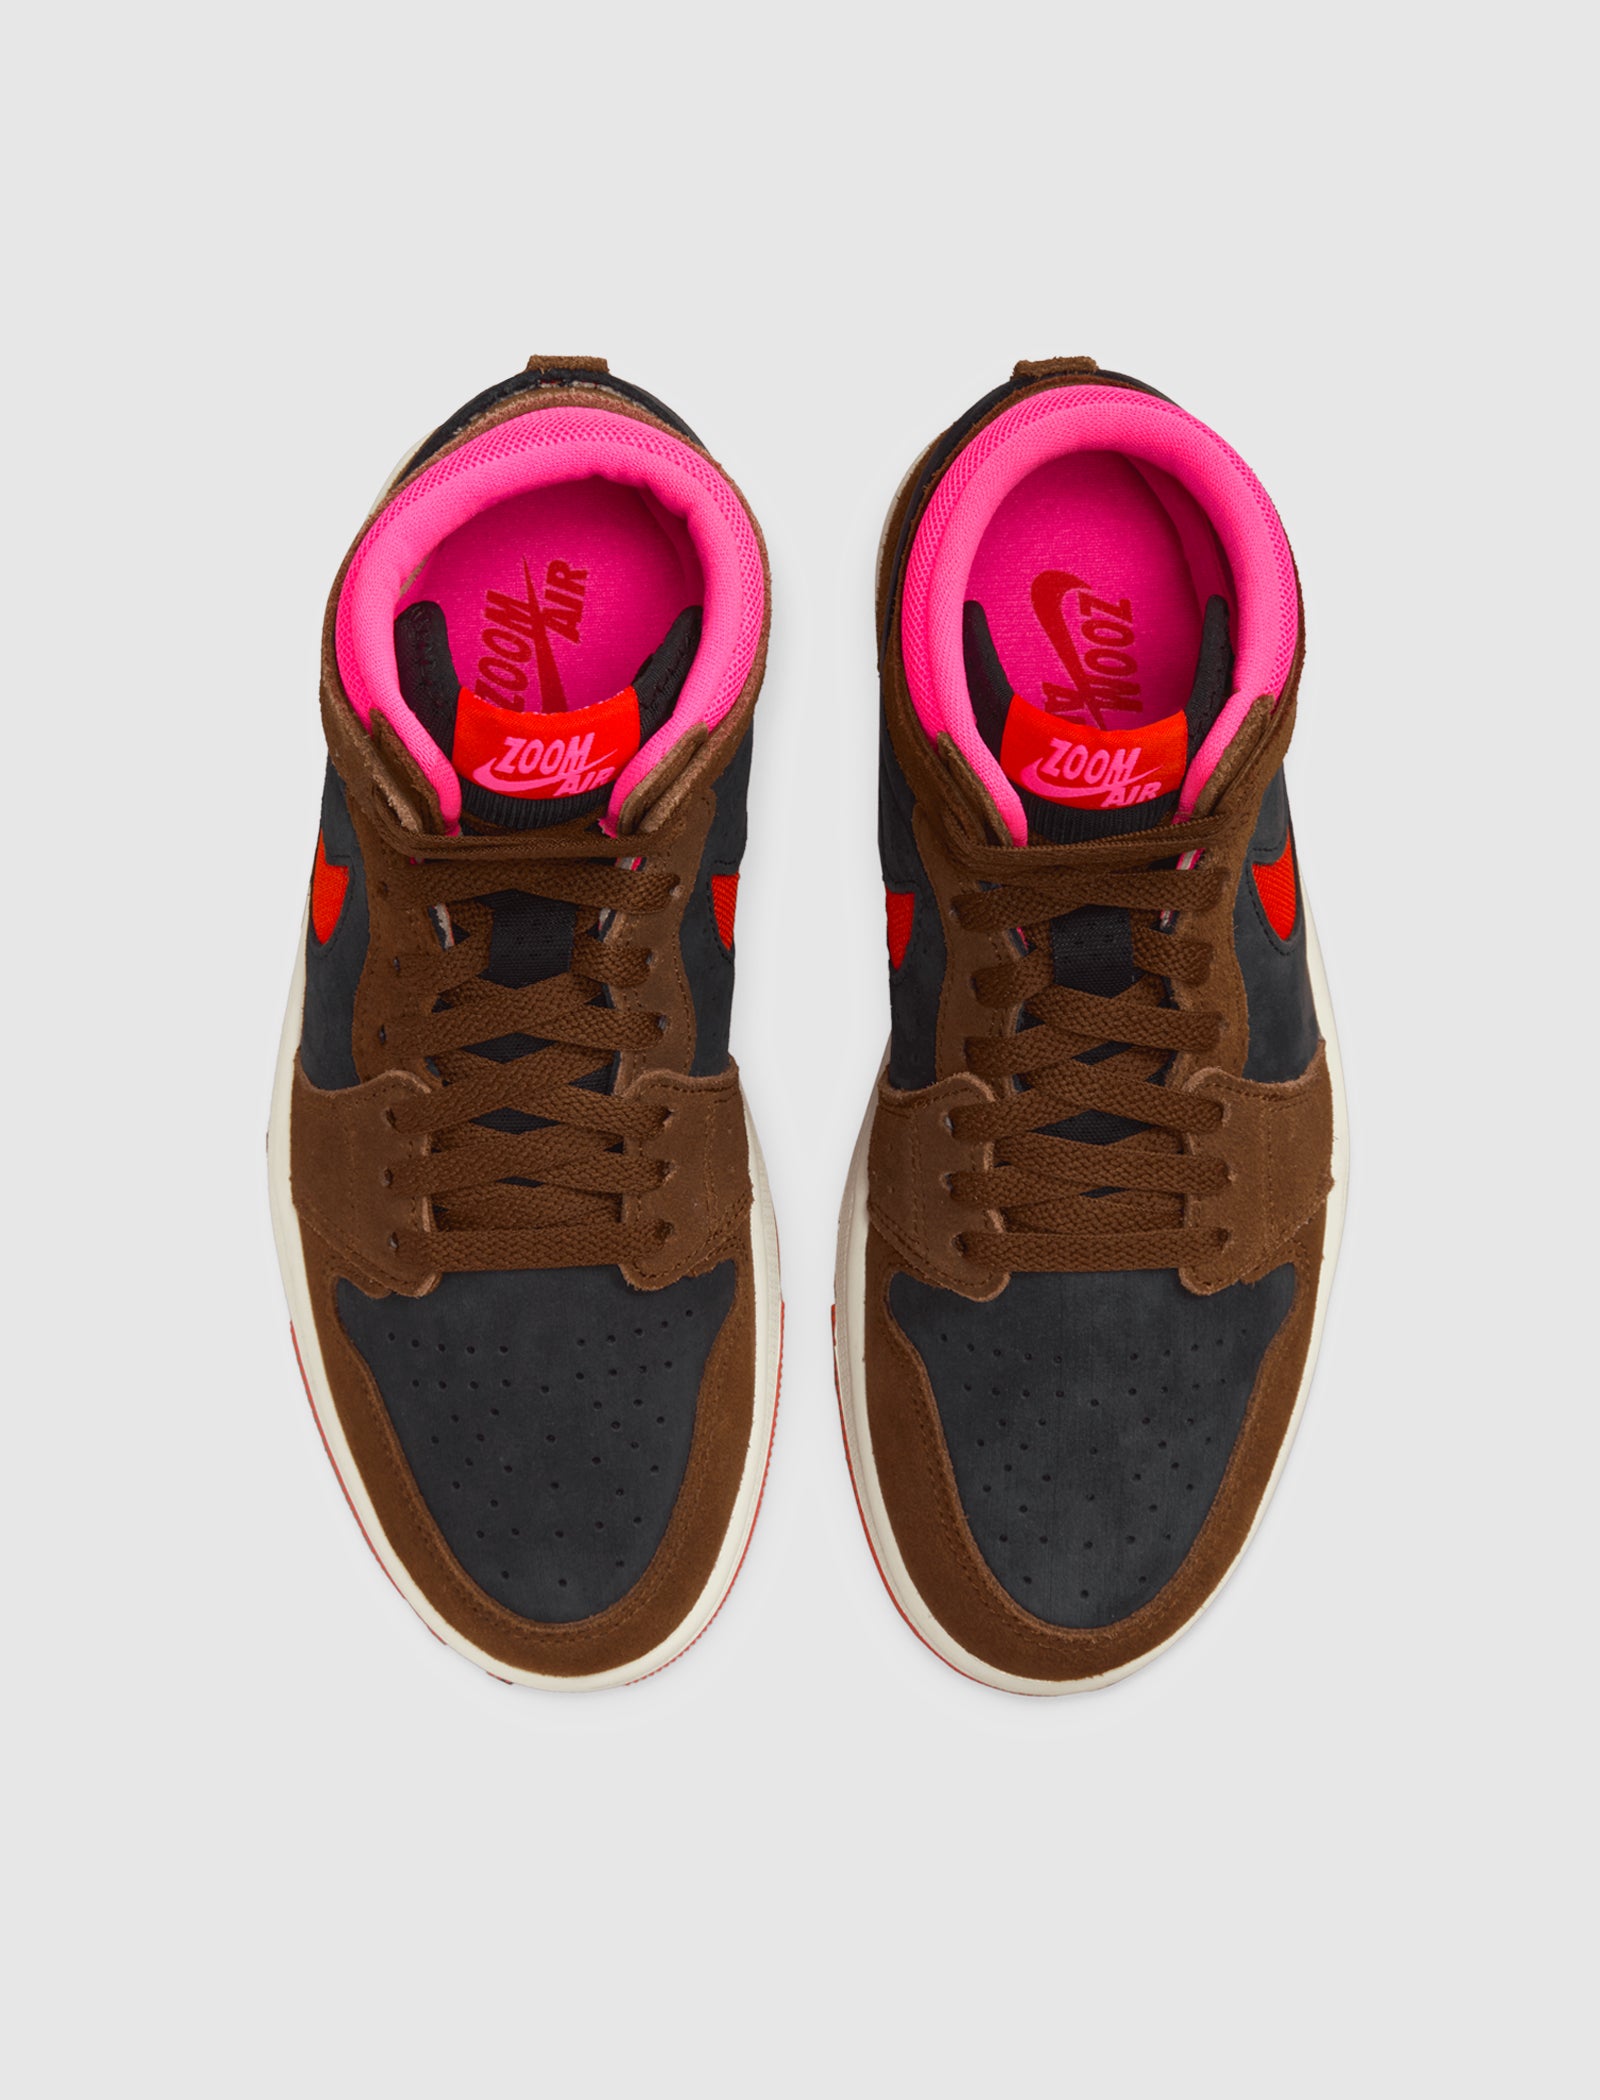 WOMEN'S AIR JORDAN 1 ZOOM CMFT 2 "CACAO WOW/PICANTE RED"